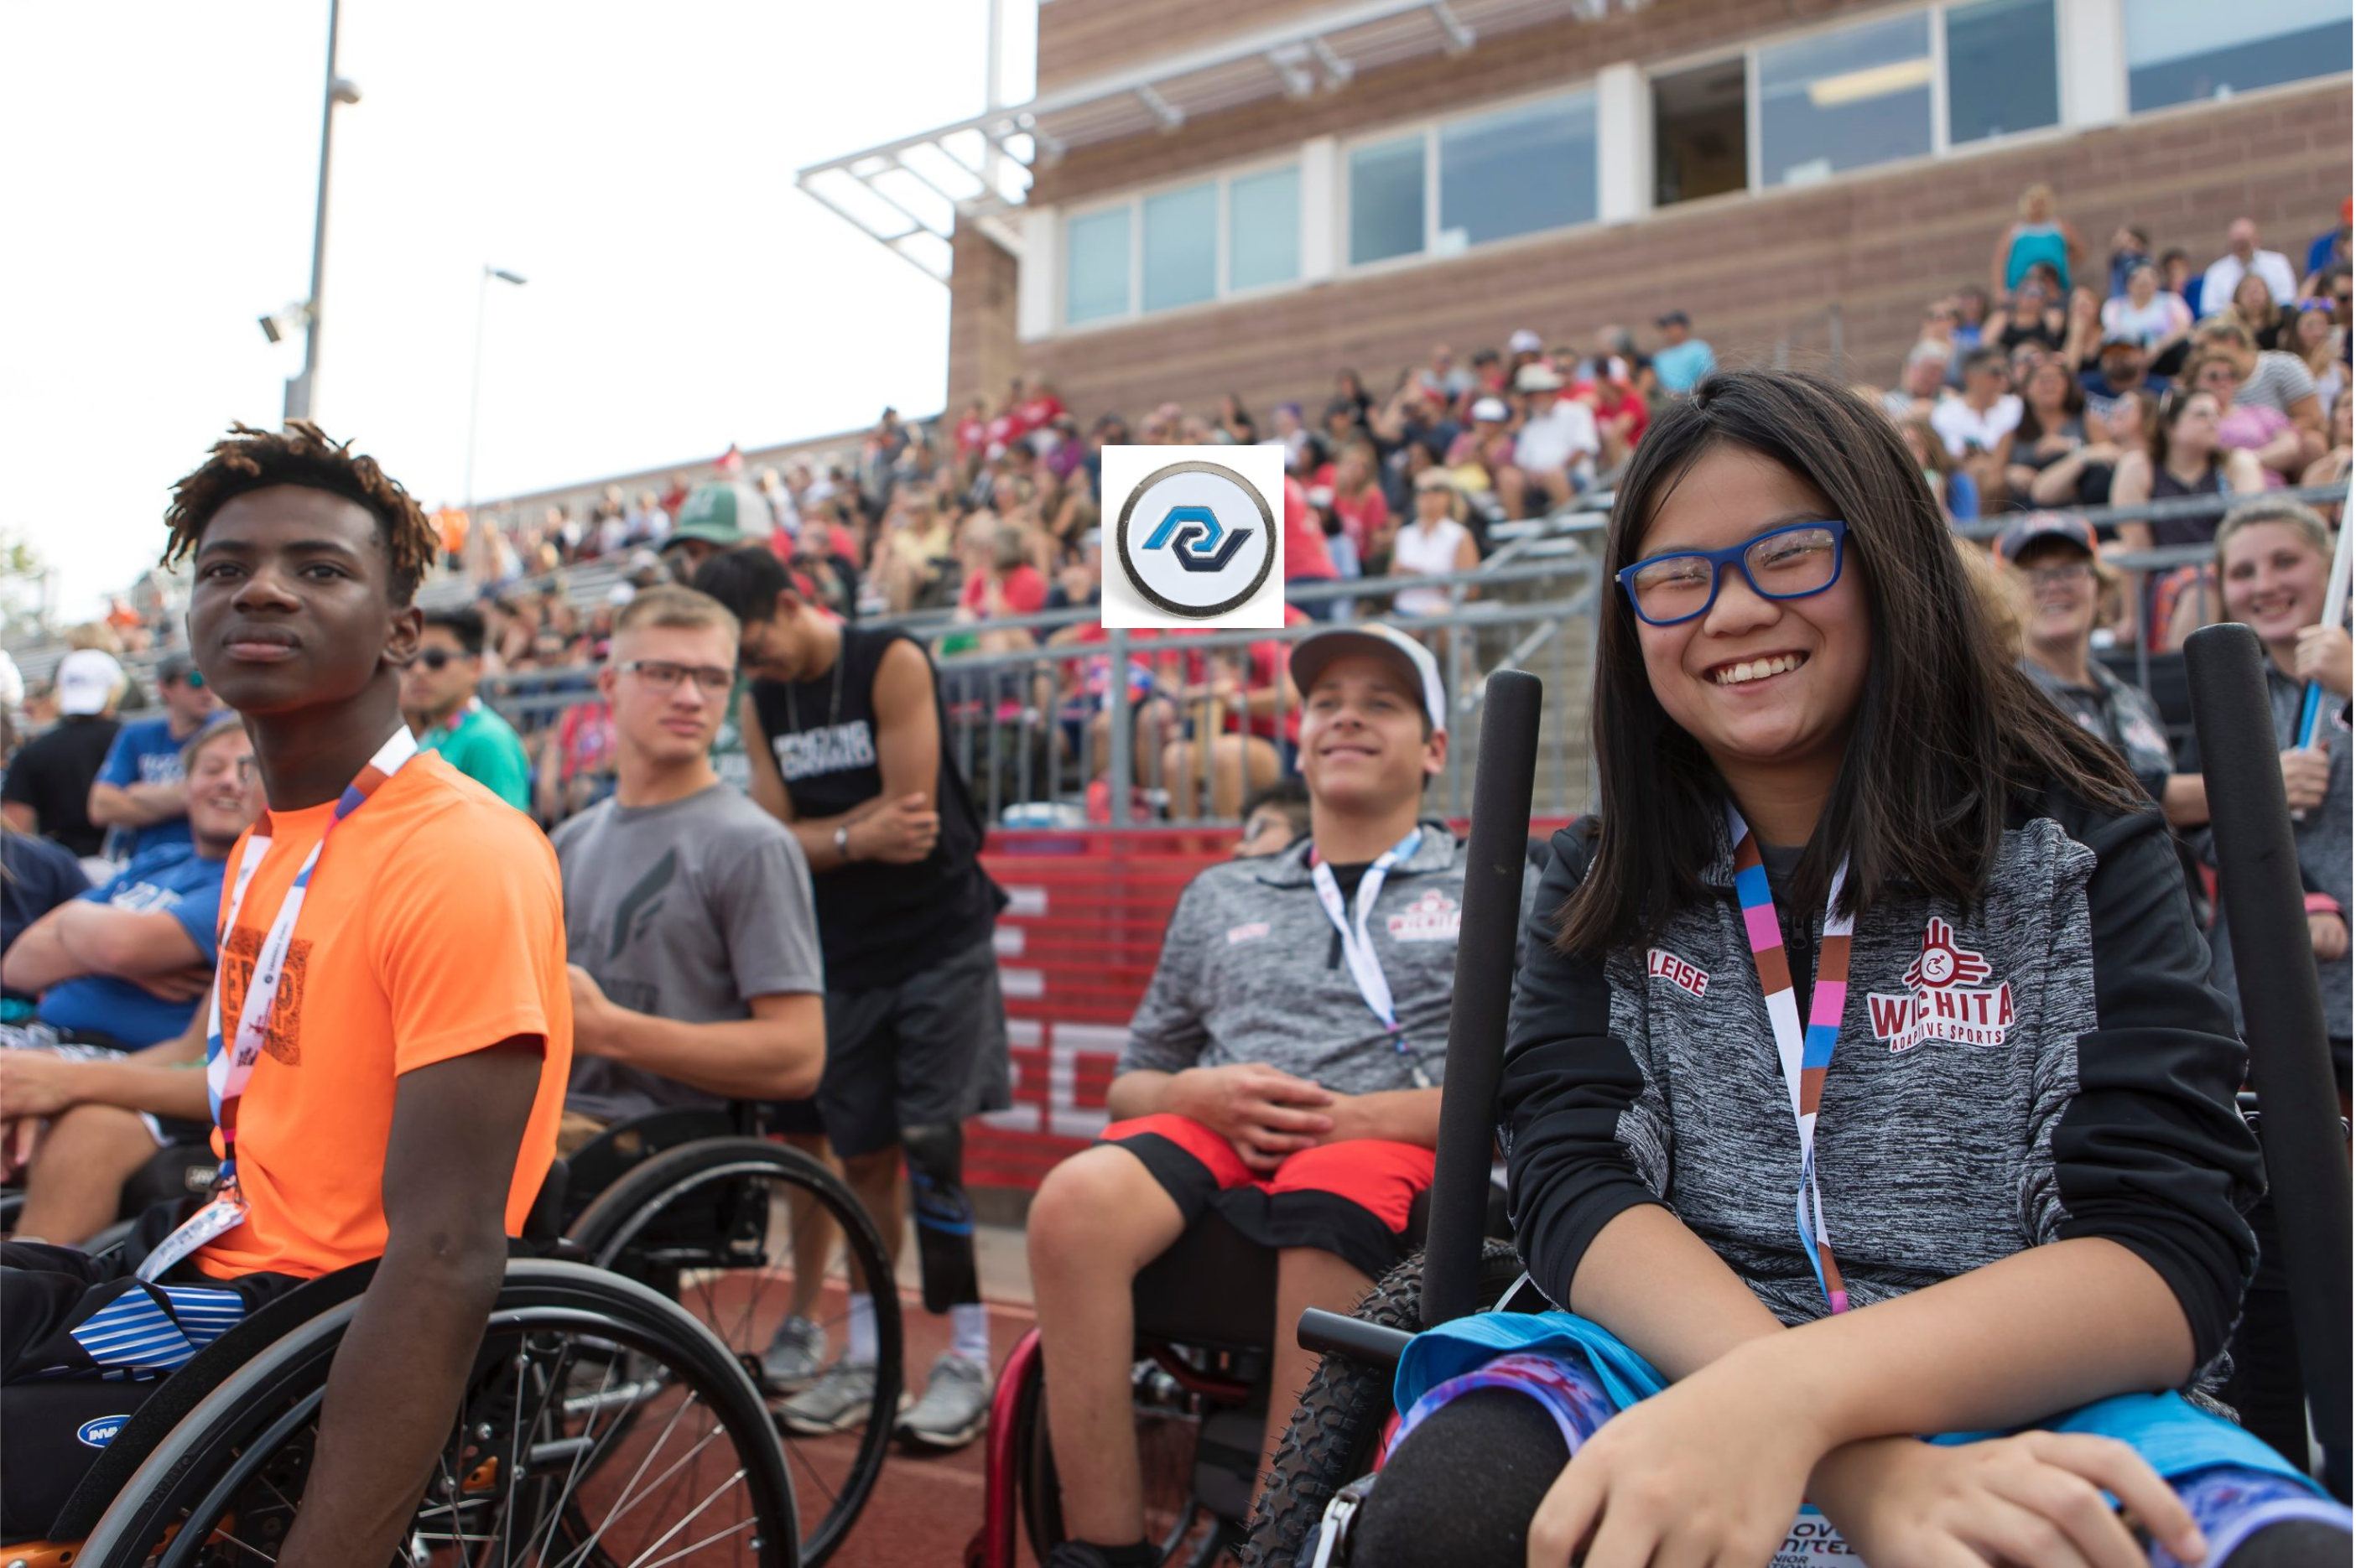 Youth adaptive athlete smiling looking at camera in the stands at an event.